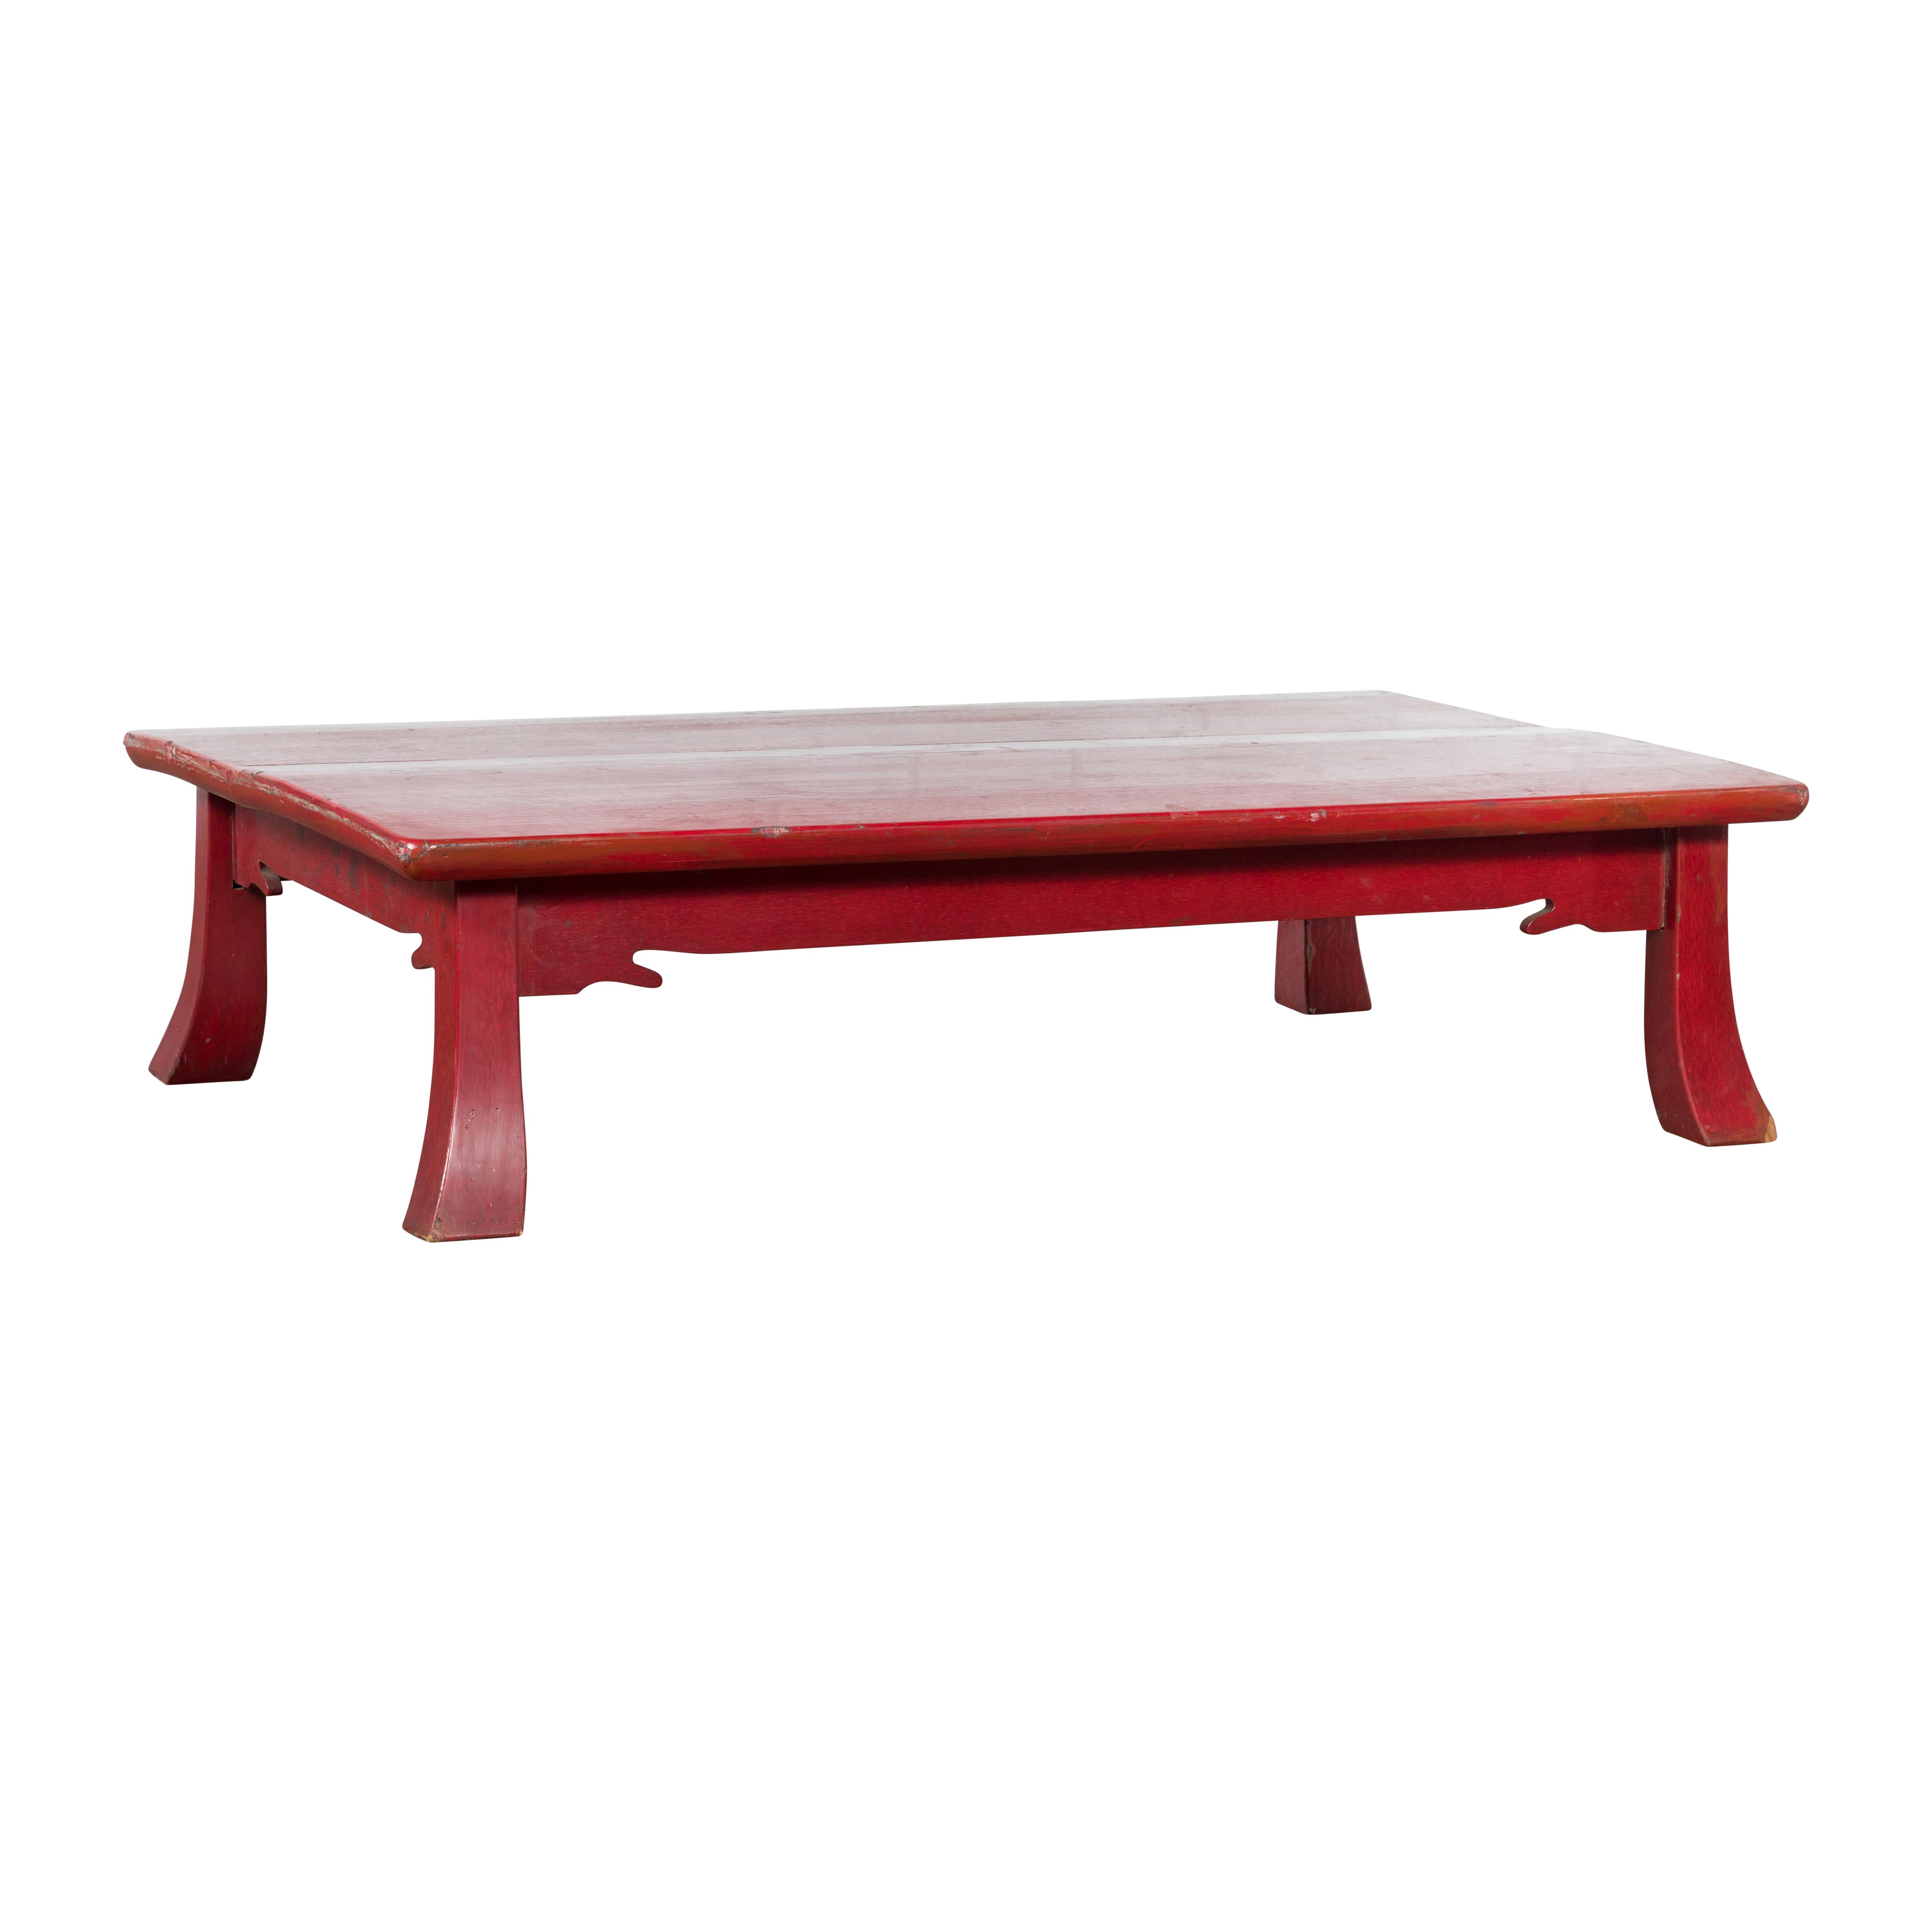 Japanese Taishō Early 20th Century Red Lacquer Coffee Table with Carved Apron For Sale 6